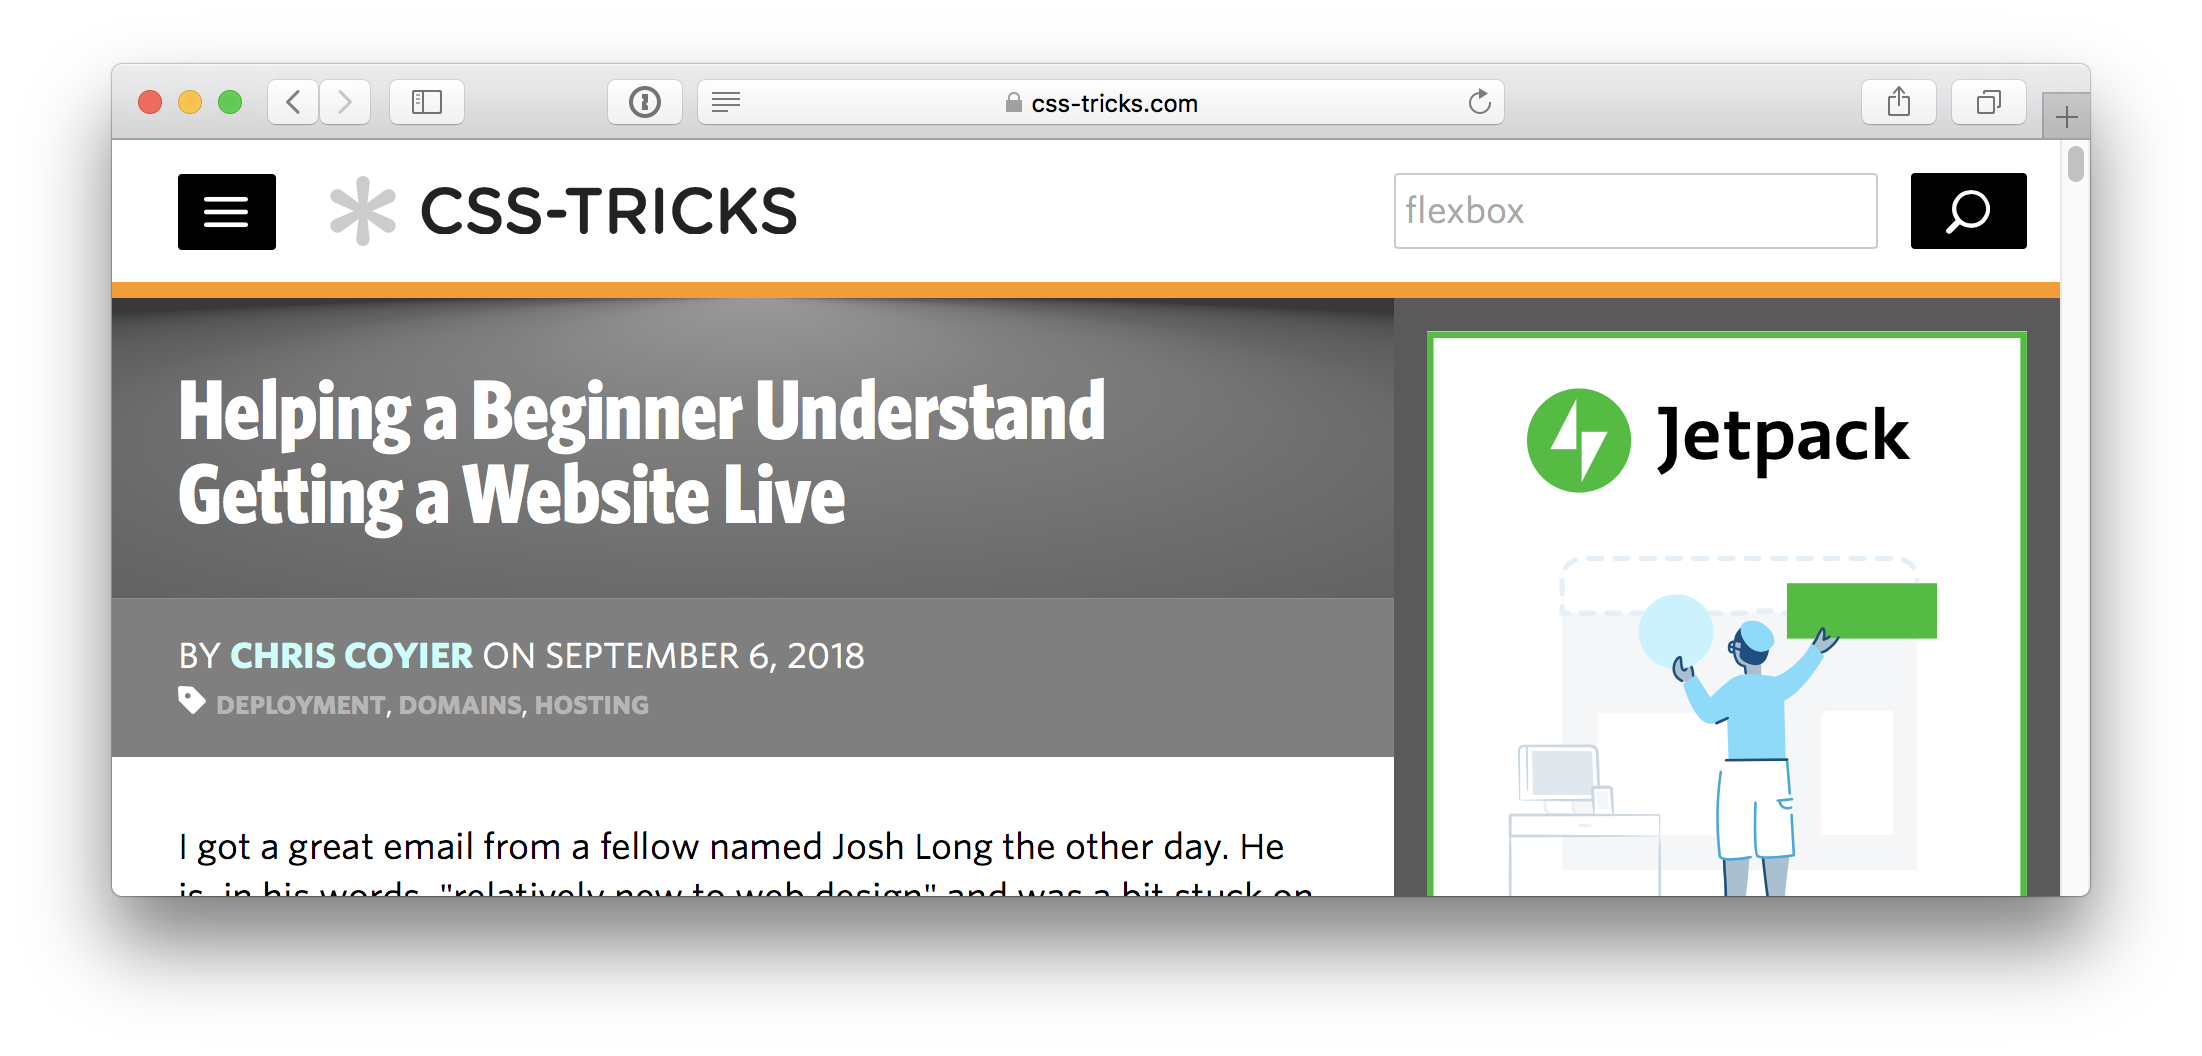 CSS-Tricks.com Encourages You To Implement New And Unique Website Designs.